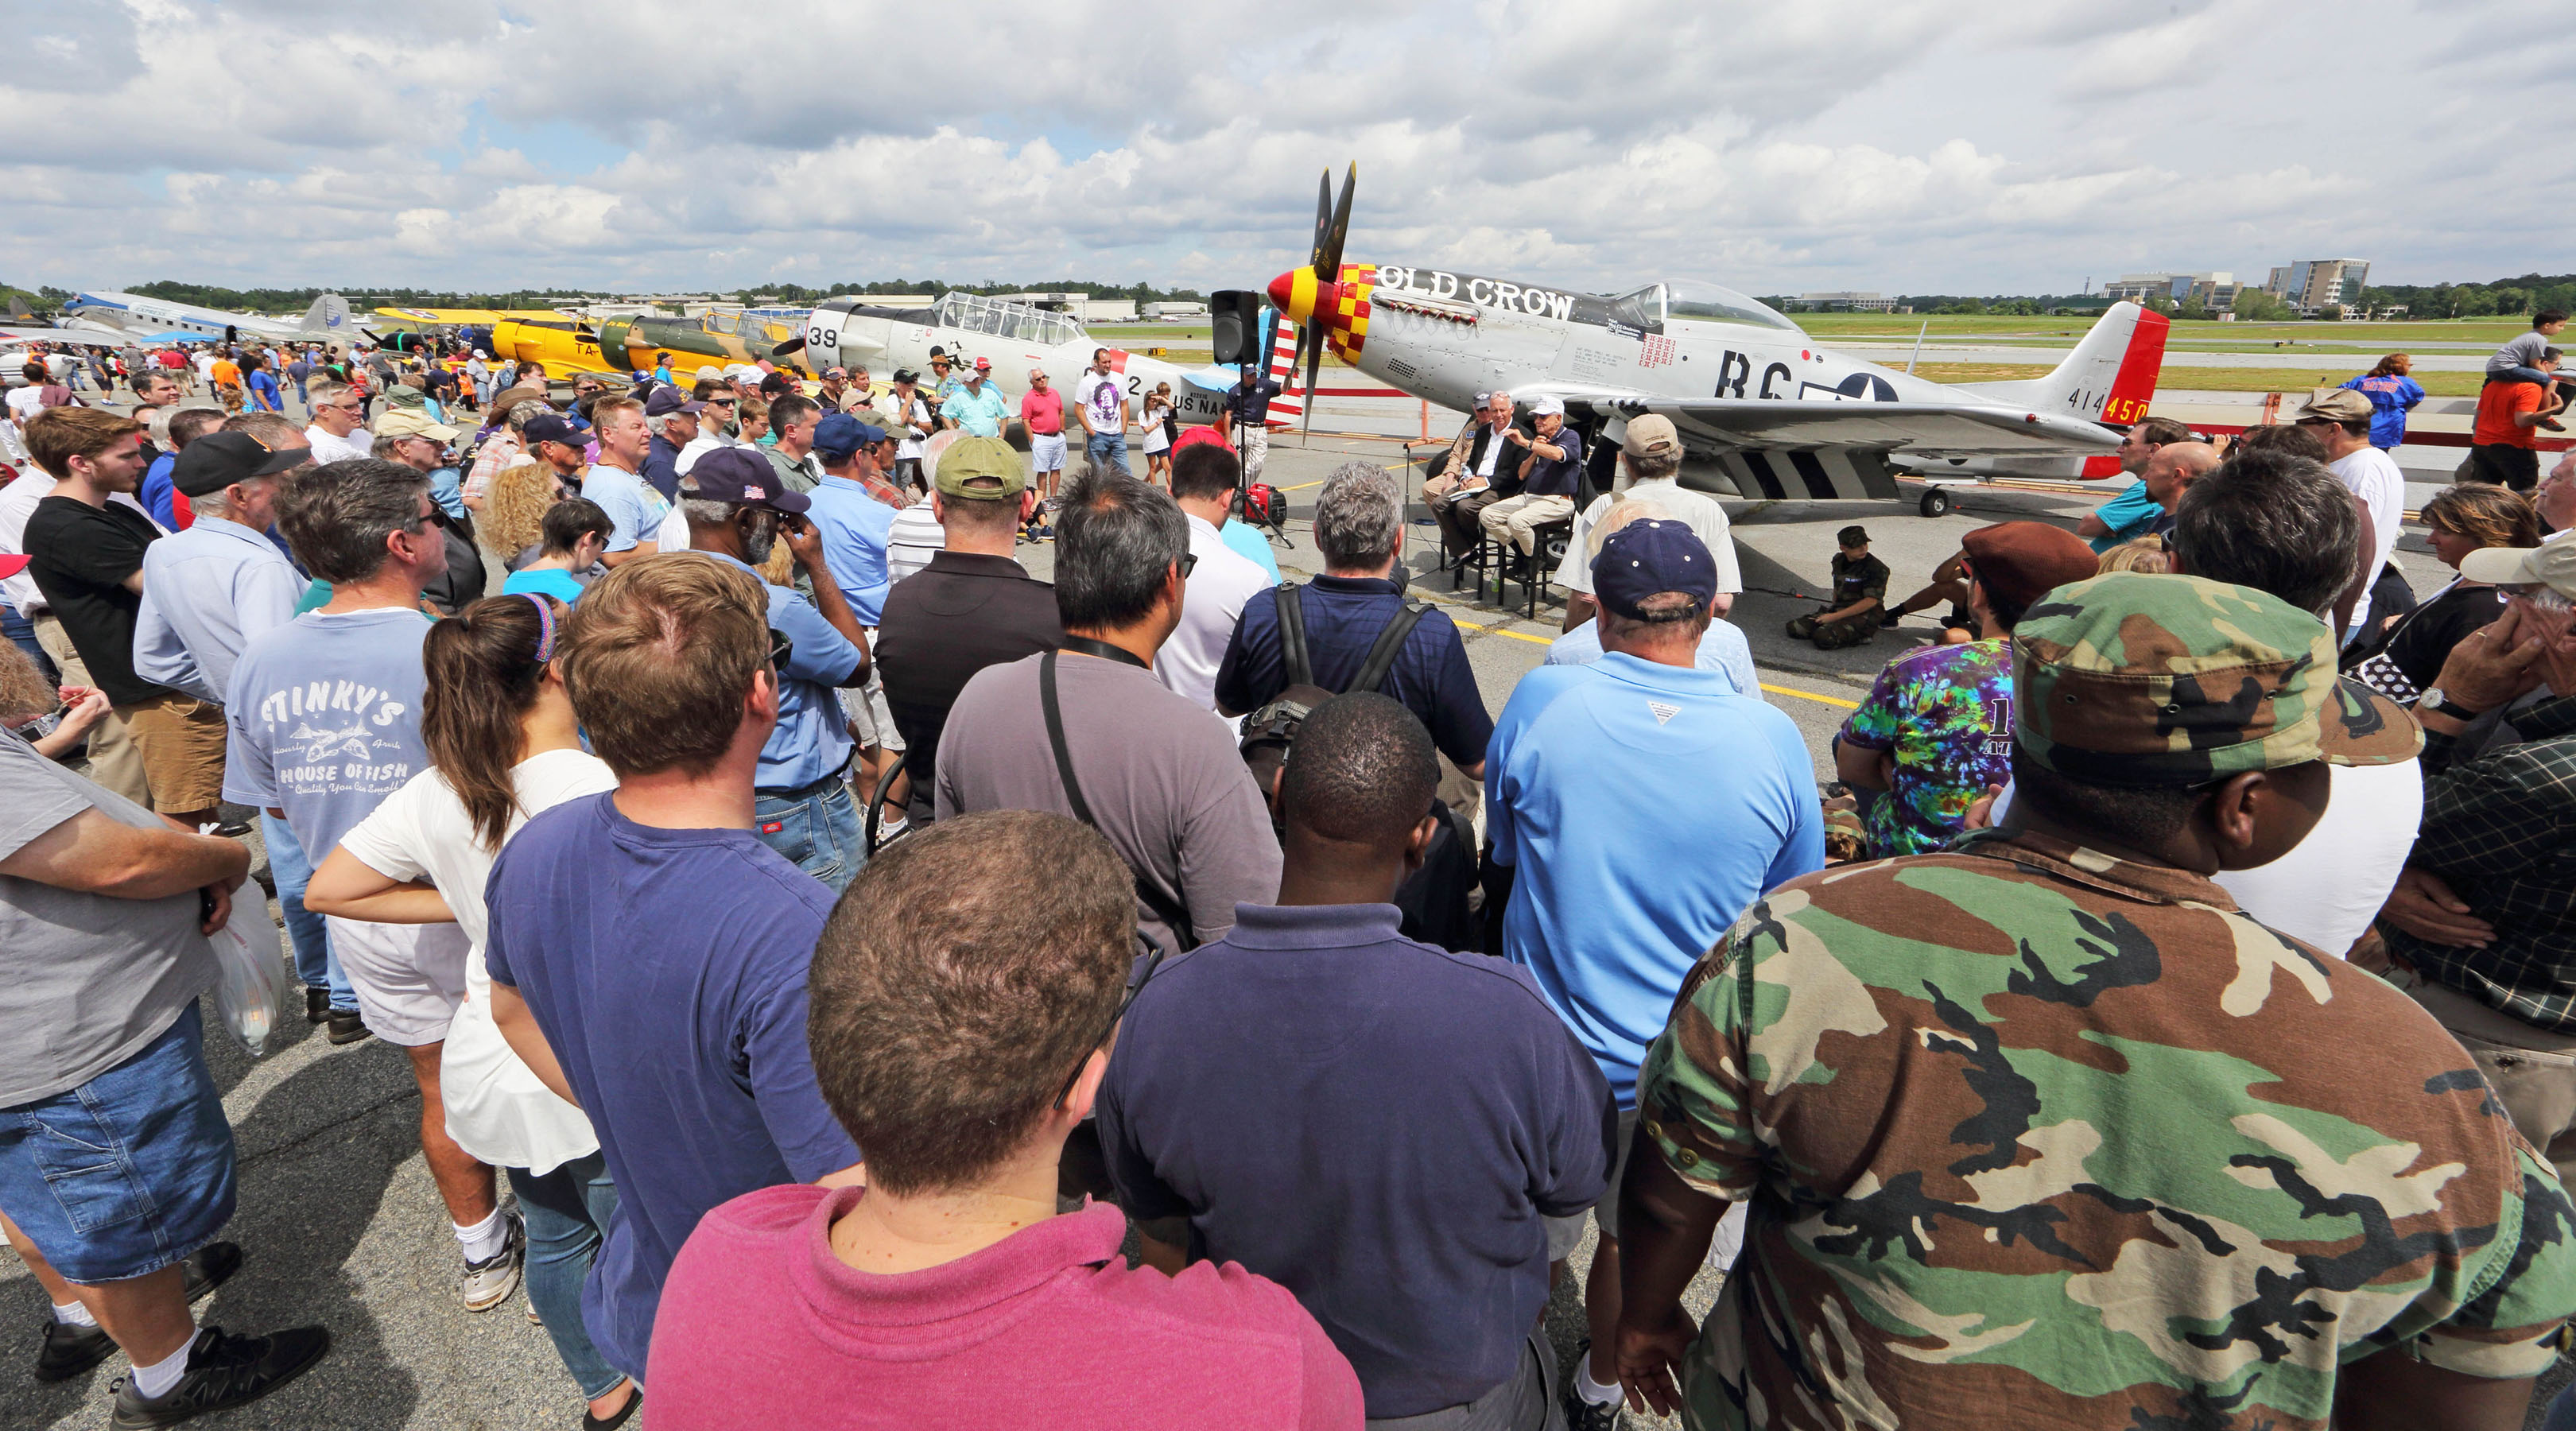 The Warbirds In Review session during the recent 2015 Atlanta Warbird Weekend. (Photo by John Willhoff)